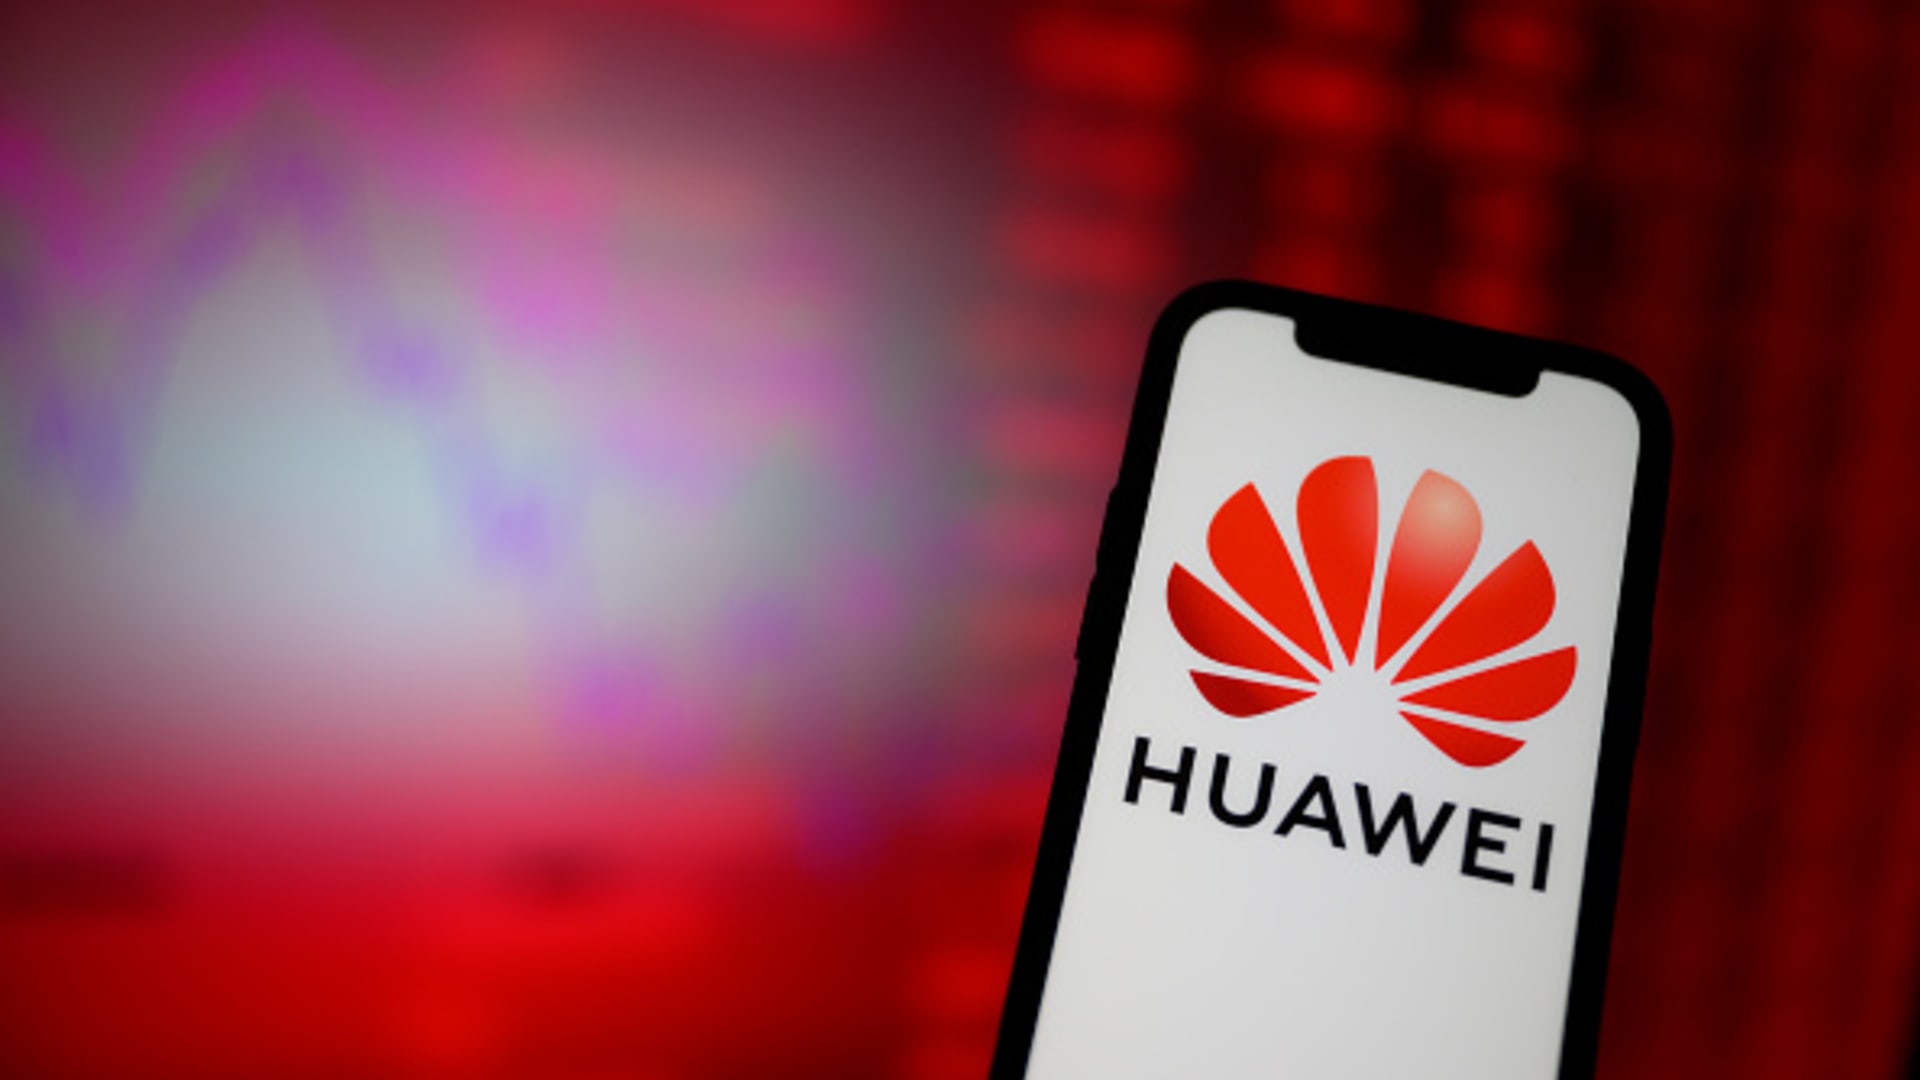 China's chip industry will be 'reborn' under U.S. sanctions, Huawei says, claiming breakthrough